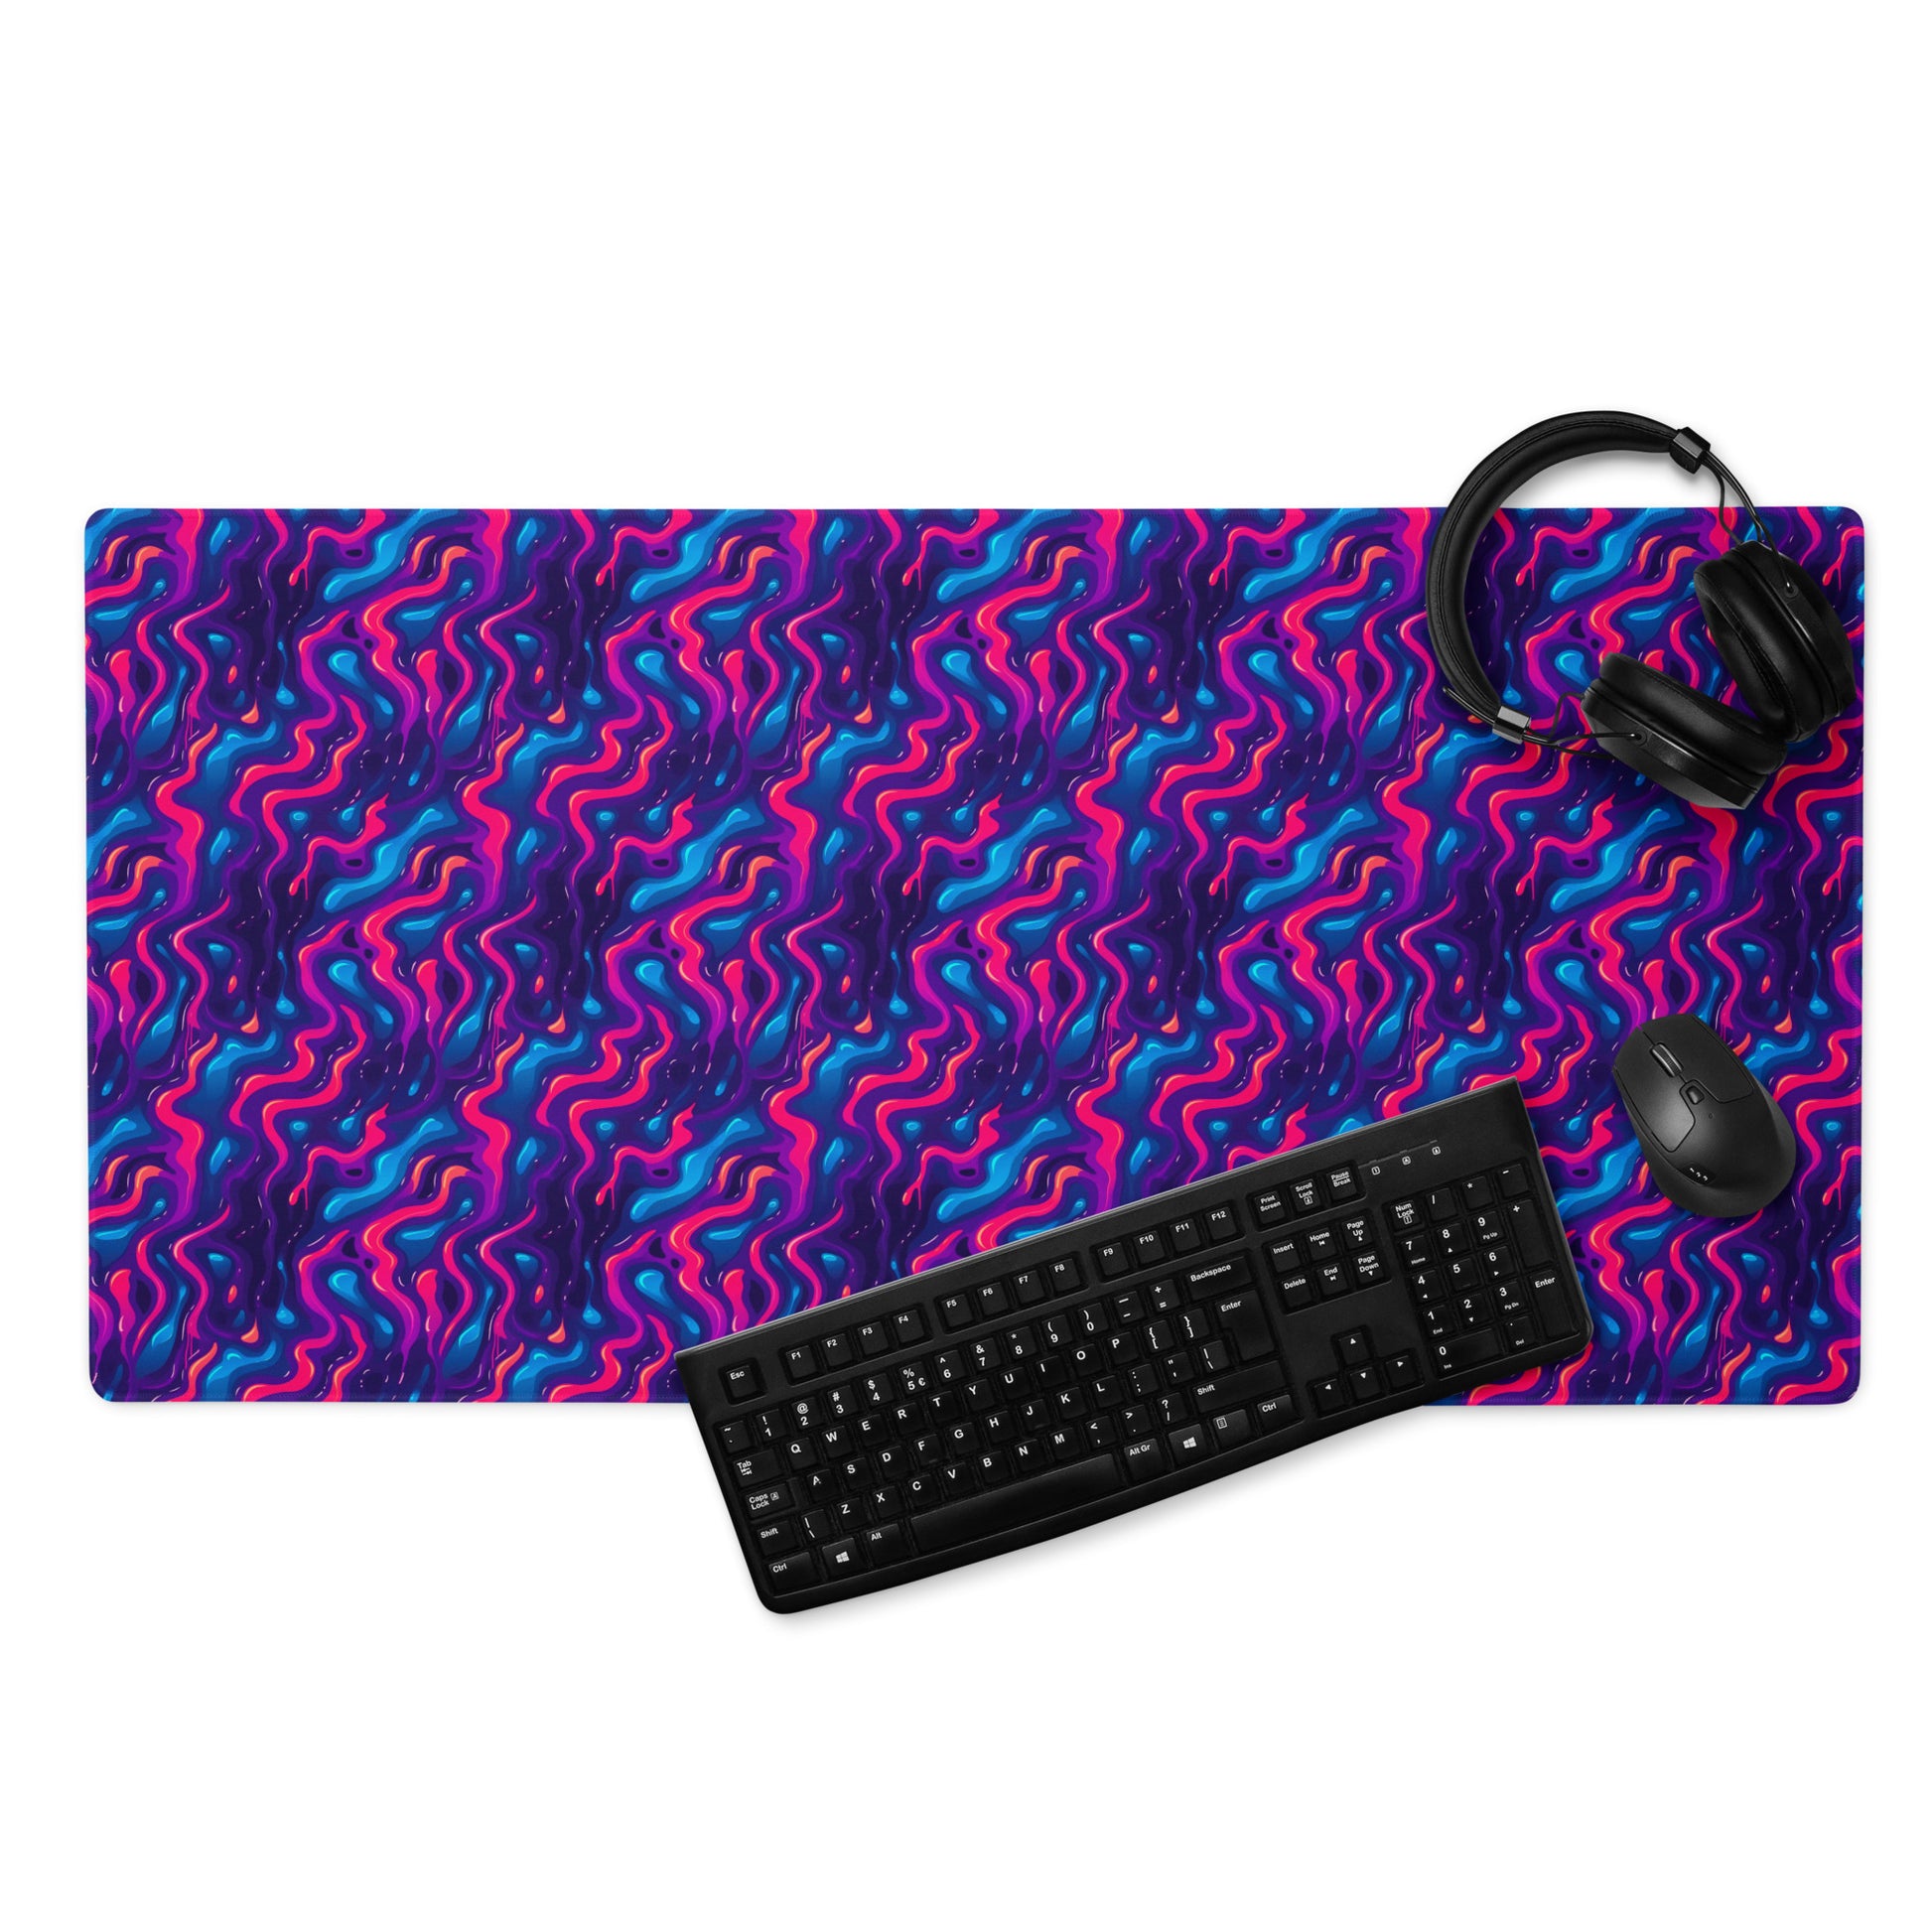 A 36" x 18" desk pad with a pink, blue and purple wavy pattern. With a keyboard, mouse, and headphones sitting on it.